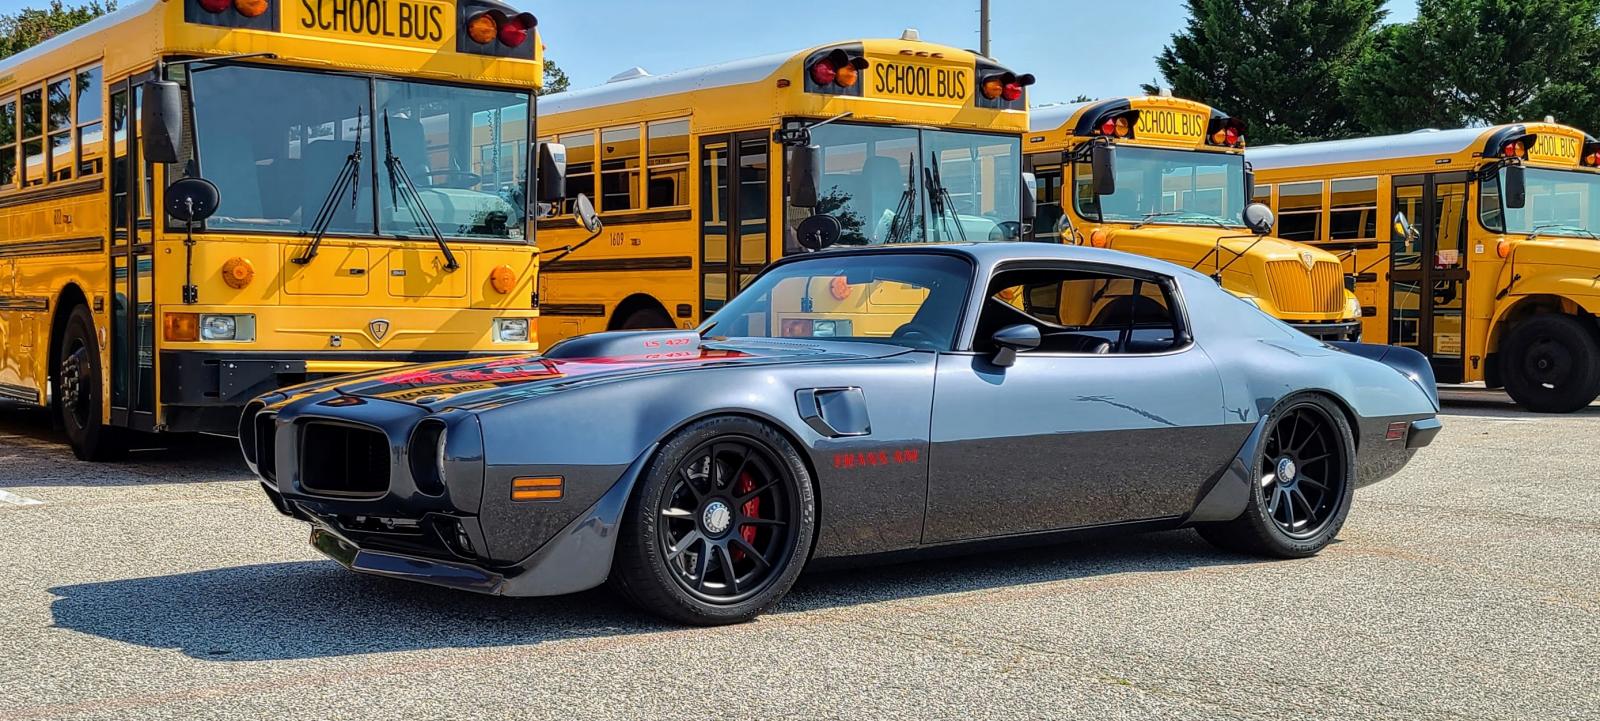 Name:  trans am and buses.jpg
Views: 804
Size:  272.8 KB